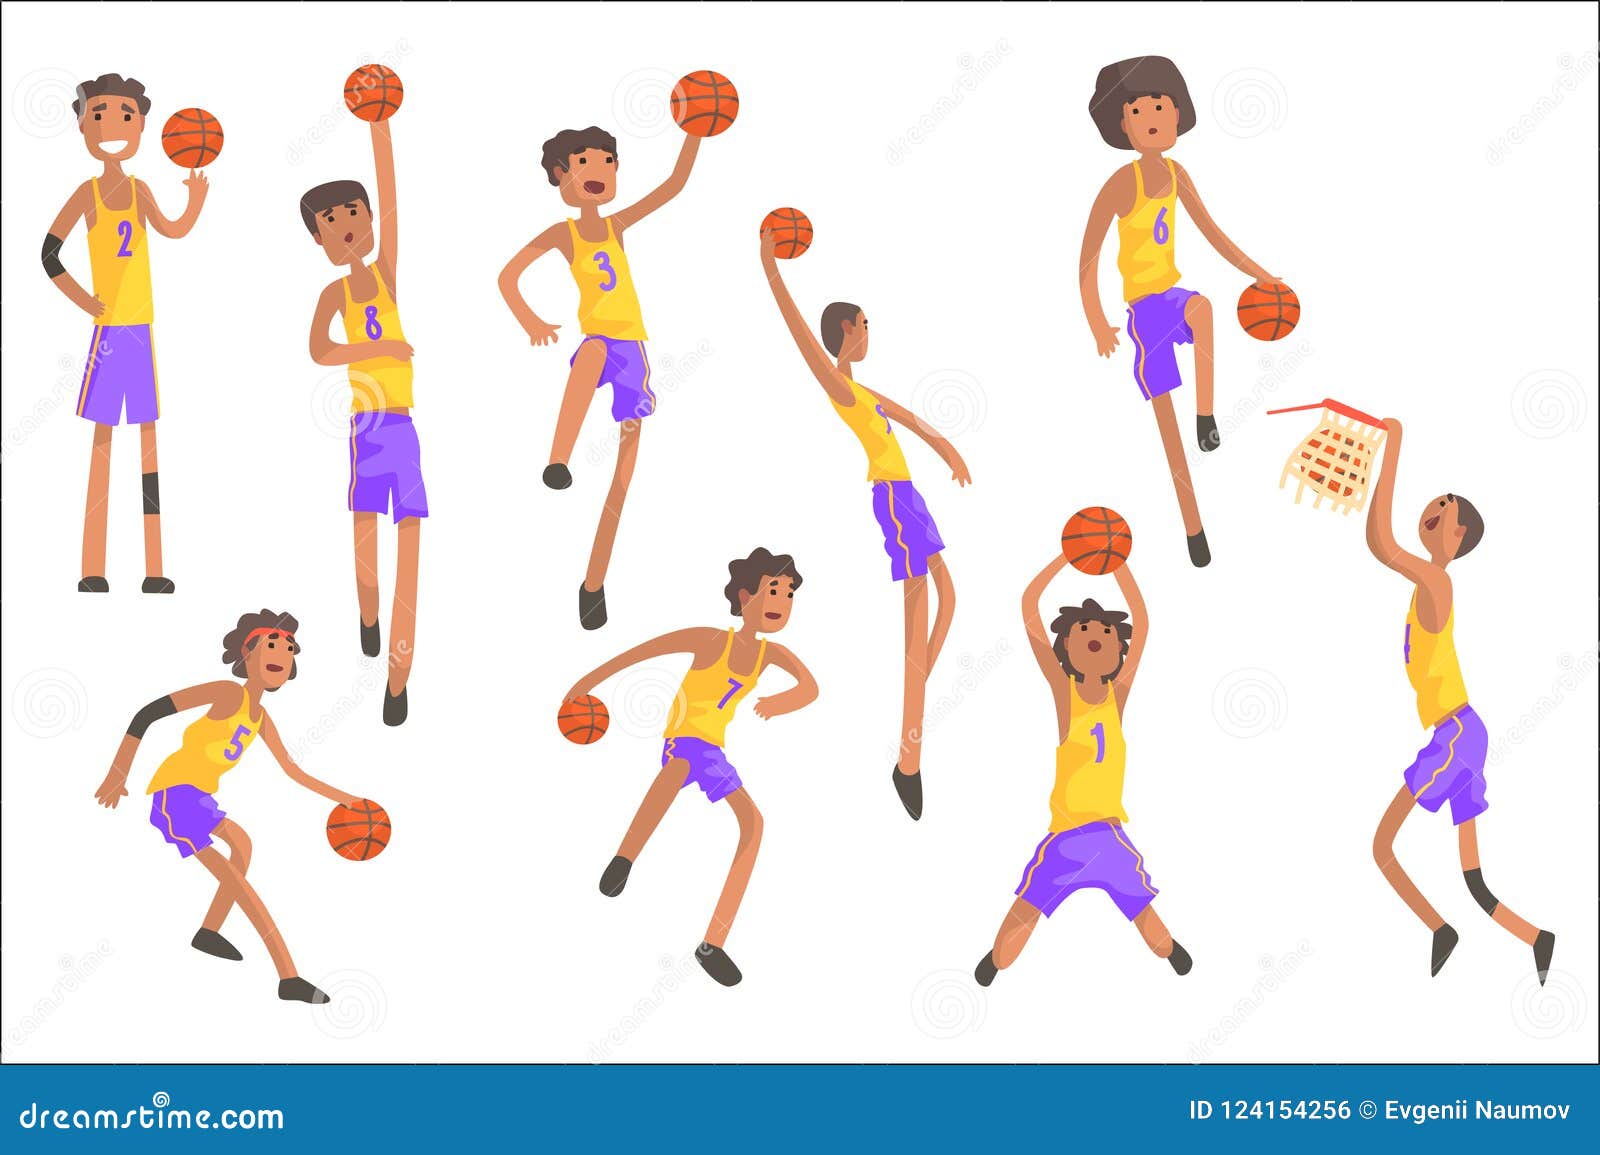 Basketball Players of Same Team Action Stickers Stock Vector - Illustration  of ball, simple: 124154256